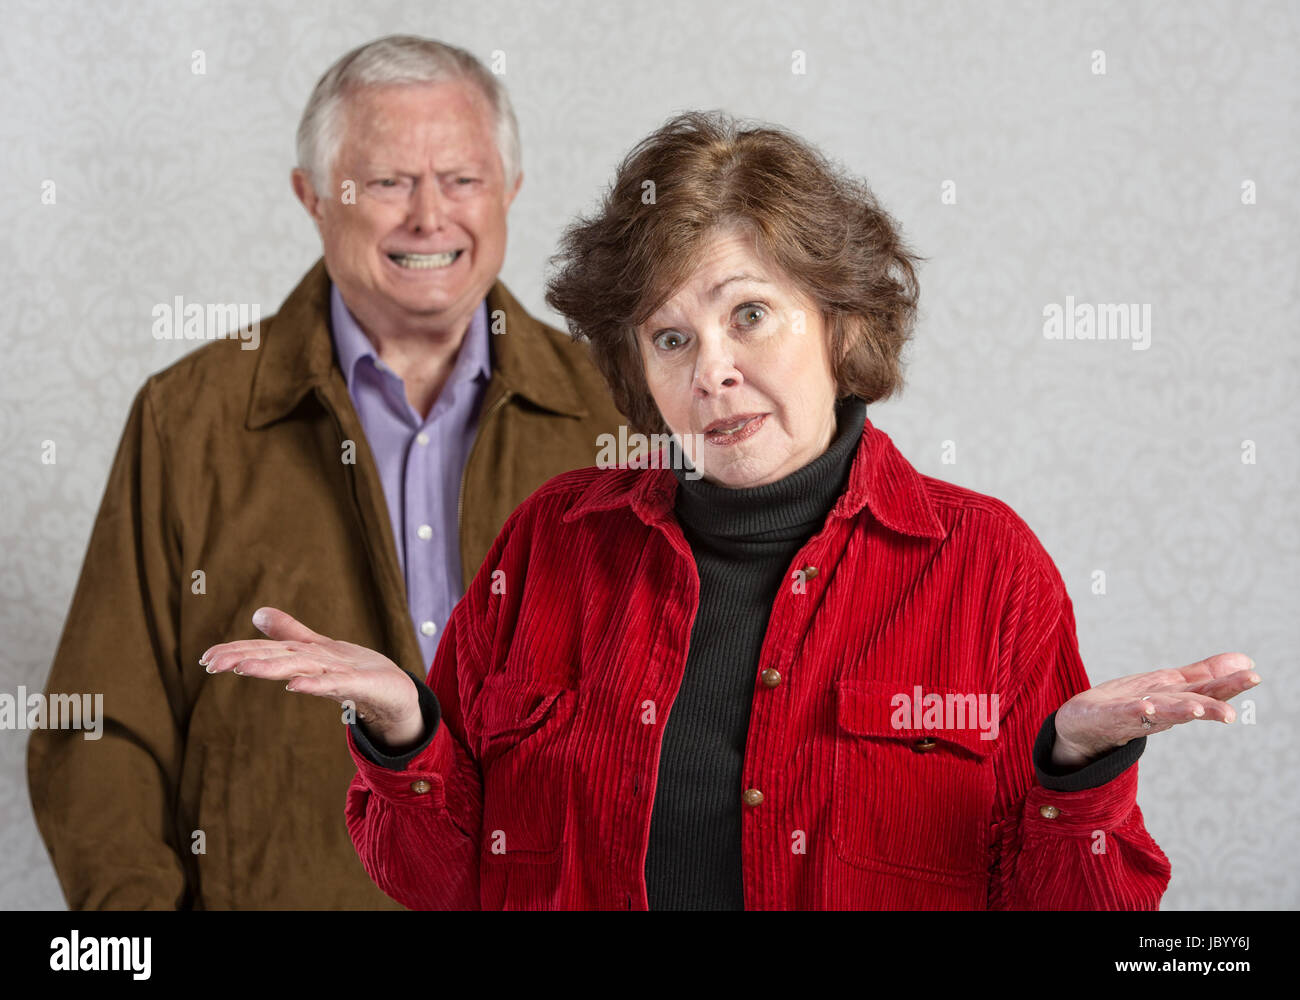 Frustrated woman with hands up and angry man Stock Photo